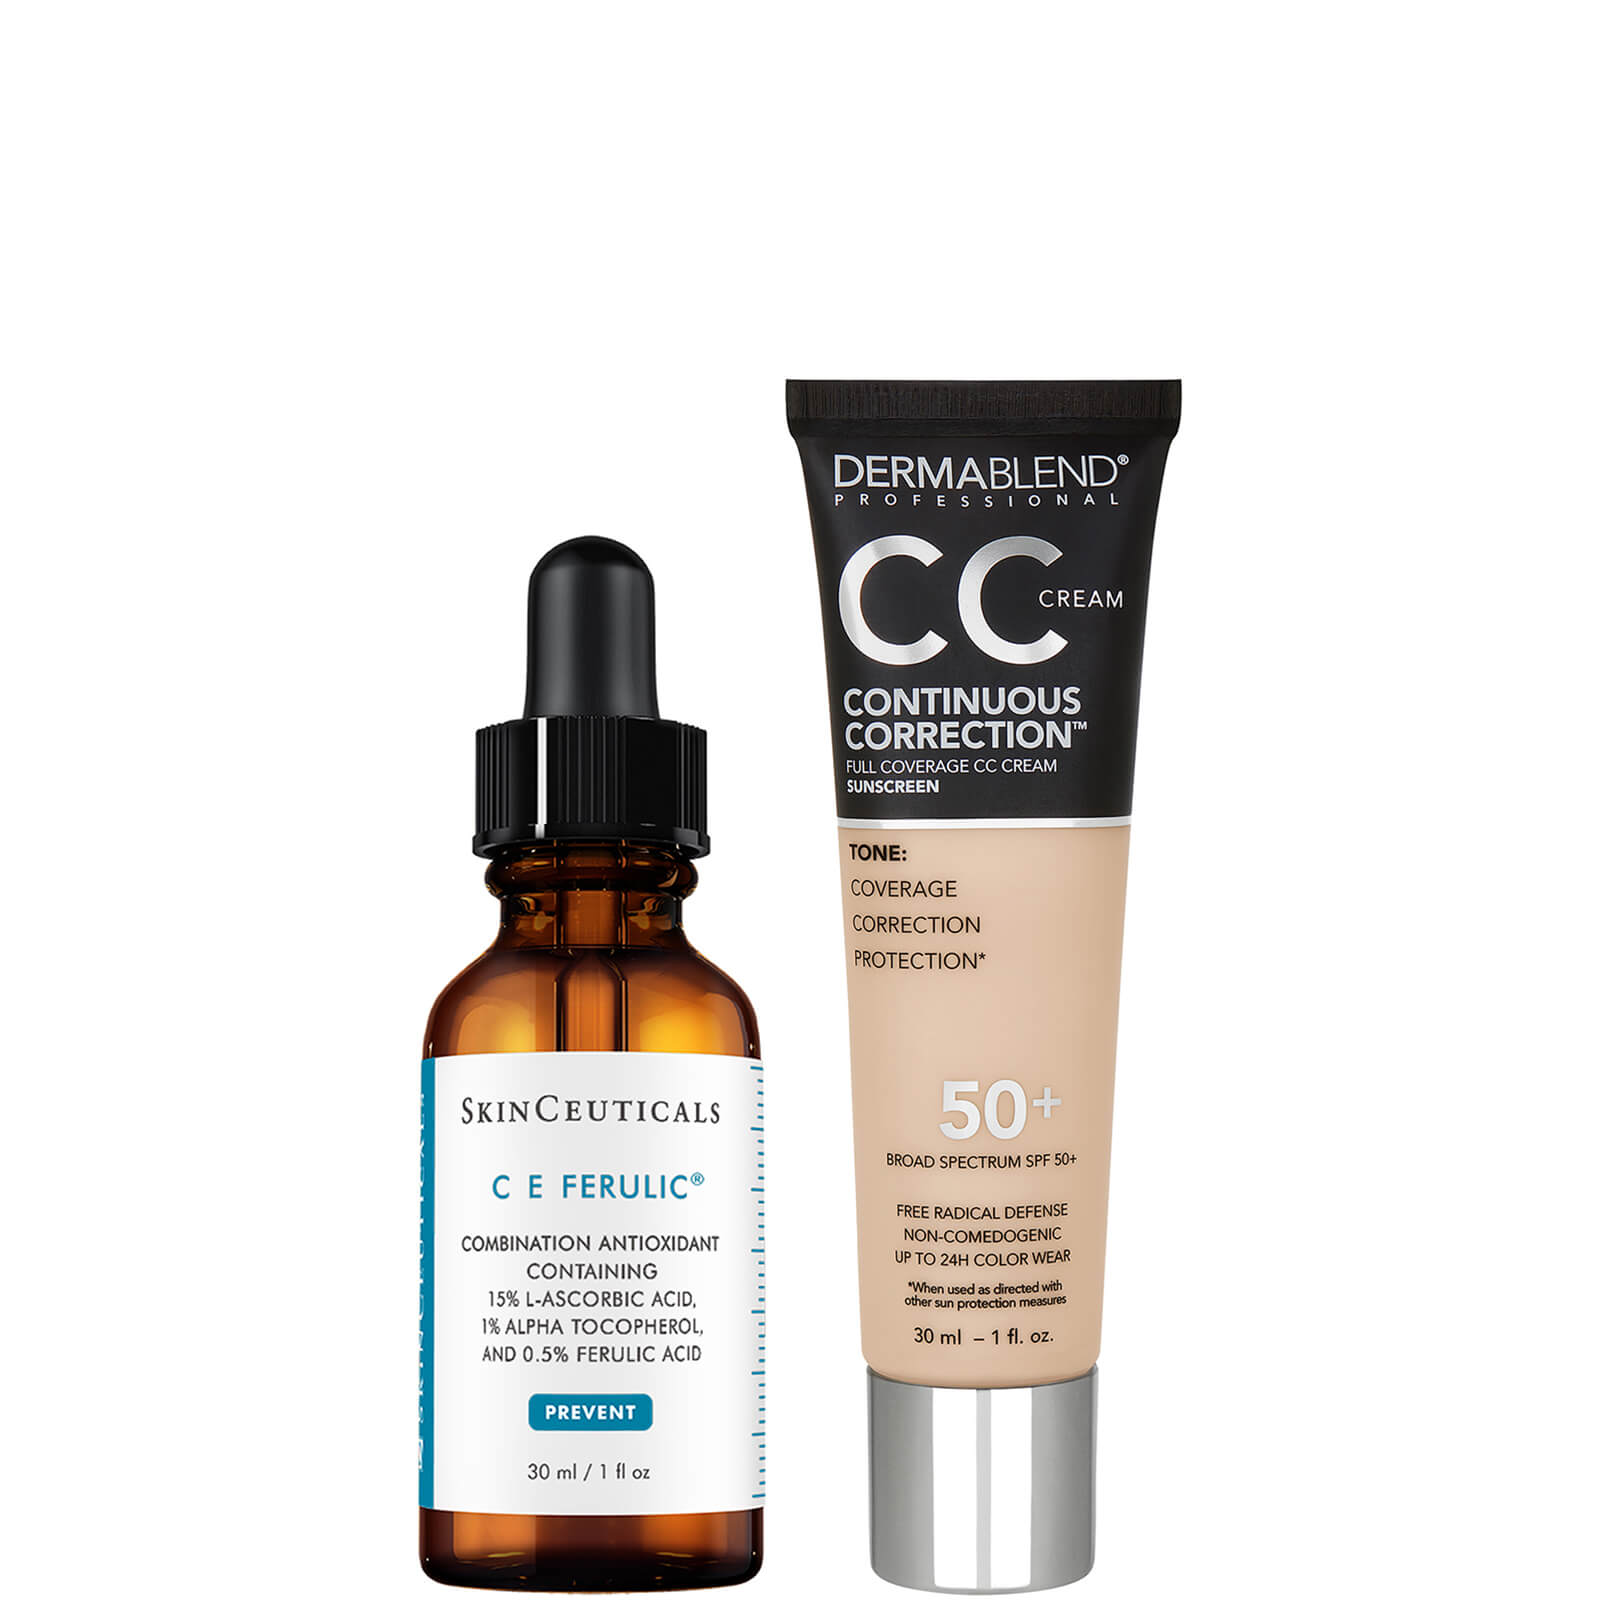 SkinCeuticals and Dermablend Anti-Aging Brightening Duo with Vitamin C and Niacinamide (Various Shades) ($223 Value) - 20N Fair to Light